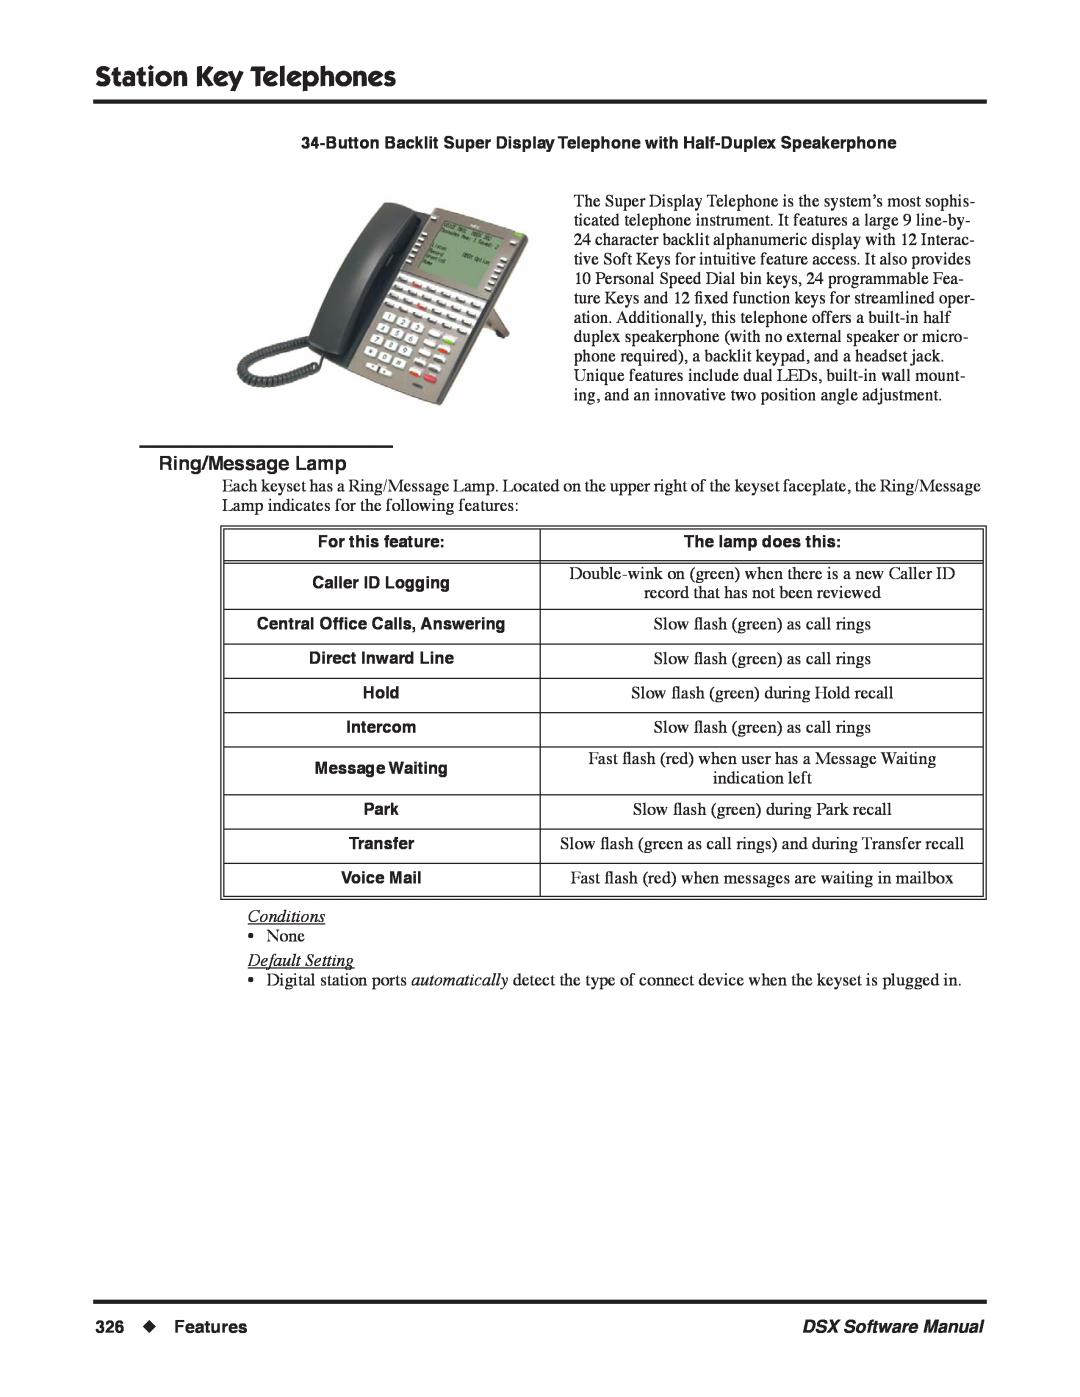 NEC N 1093100 Station Key Telephones, Ring/Message Lamp, For this feature, The lamp does this, Conditions, Default Setting 